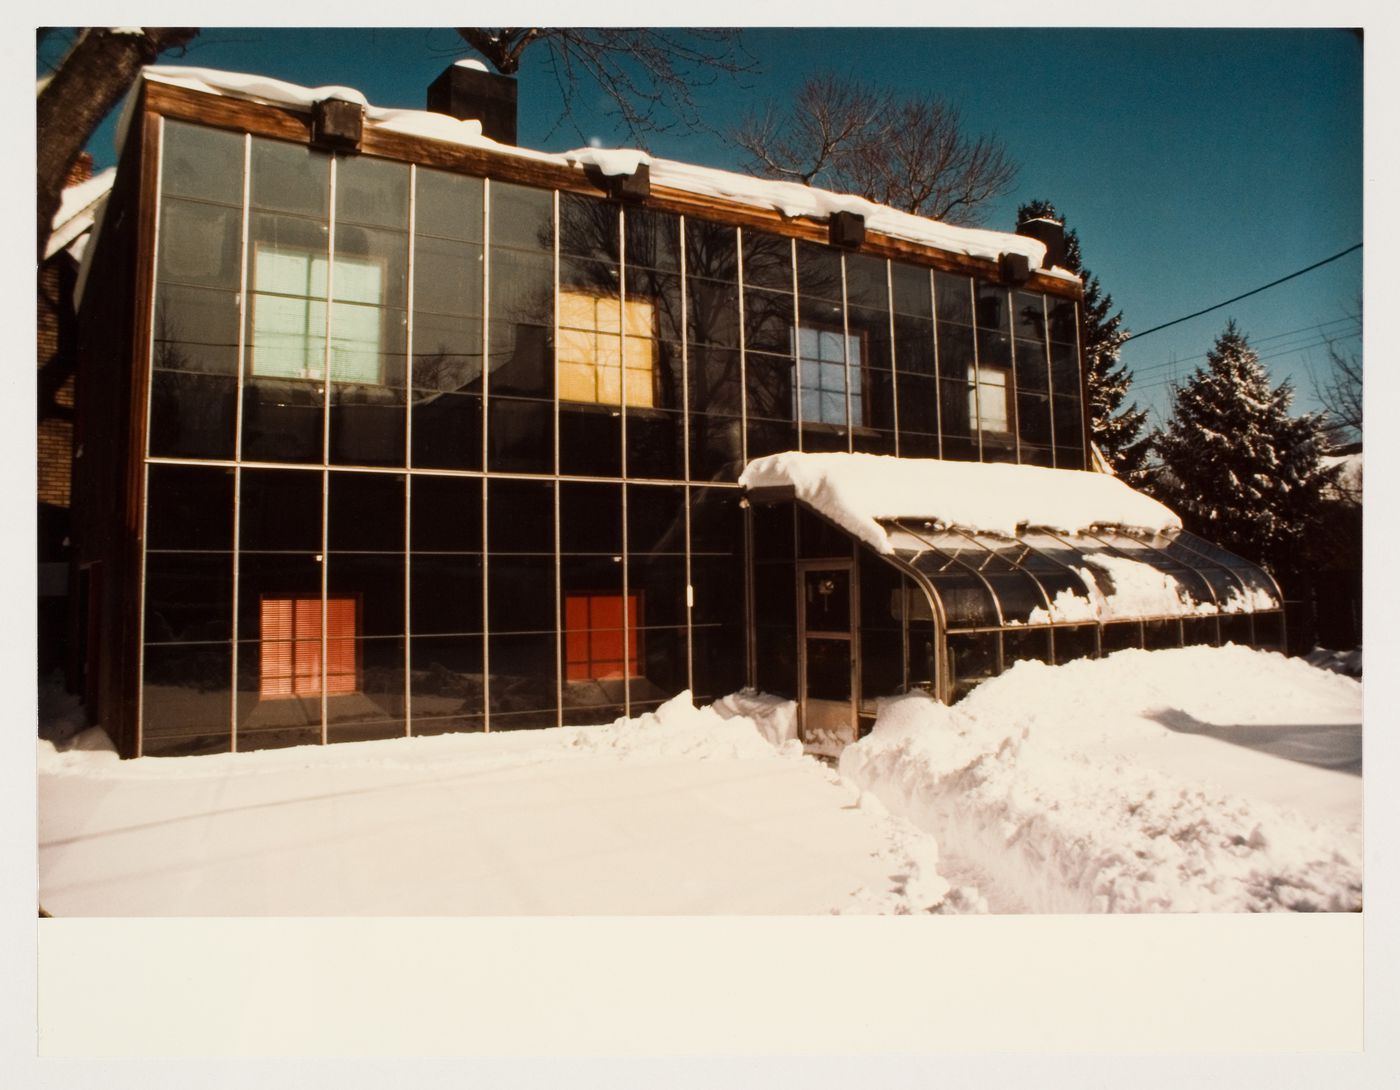 Exterior view, during winter, of Kelbaugh House in Princeton, New Jersey